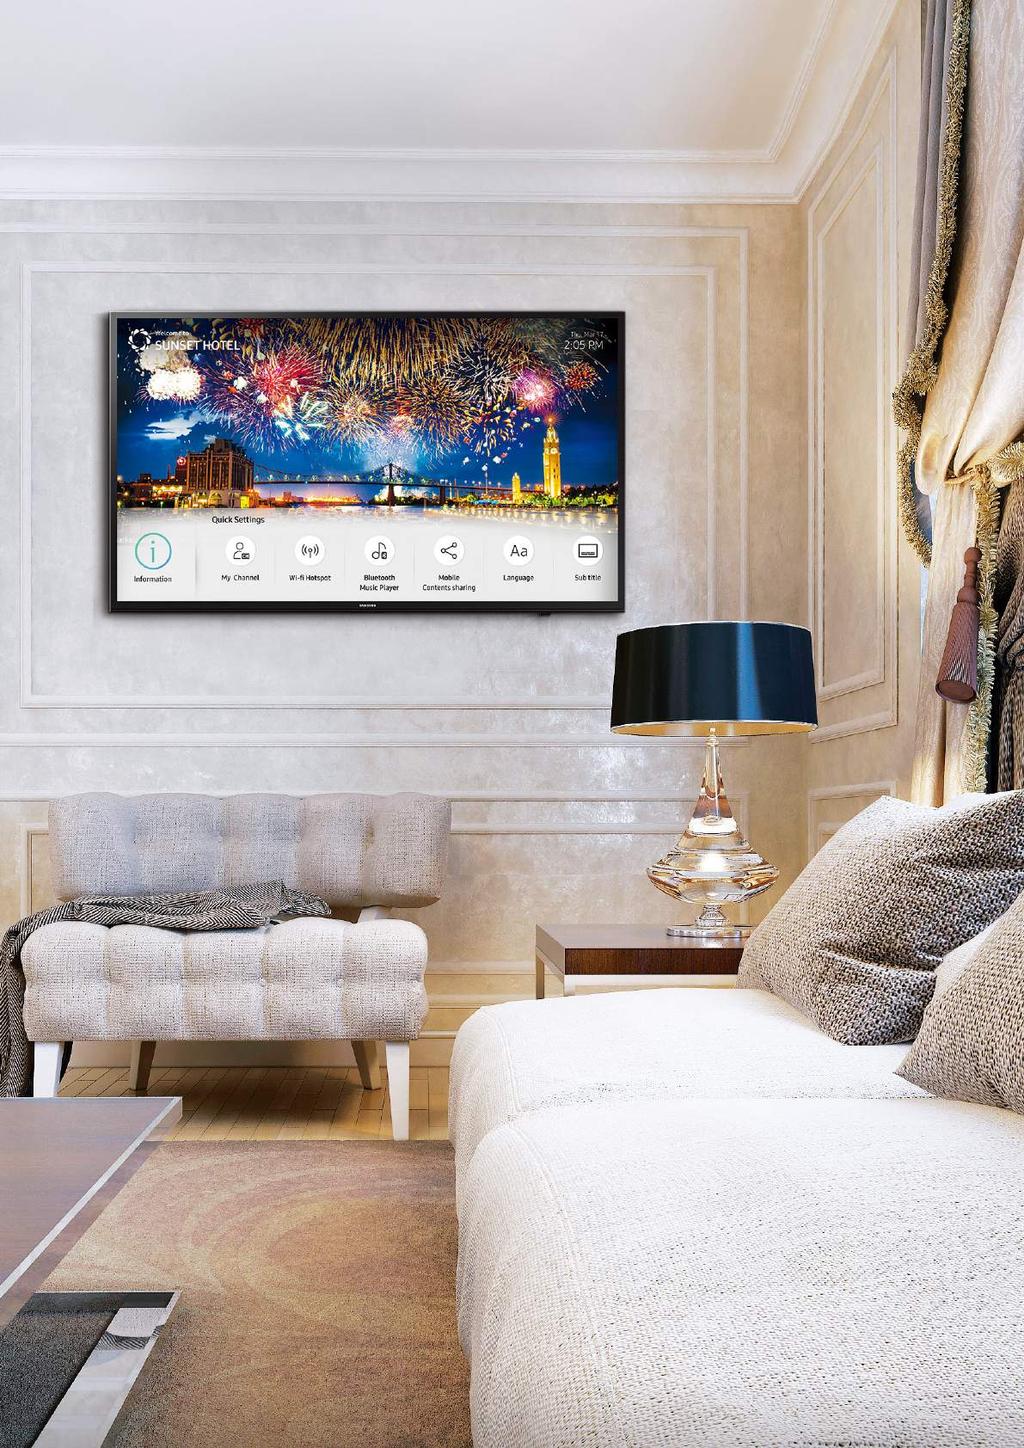 Legal and additional information 2018 Samsung SMART Hospitality Displays About Samsung Samsung inspires the world and shapes the future with transformative ideas and technologies.